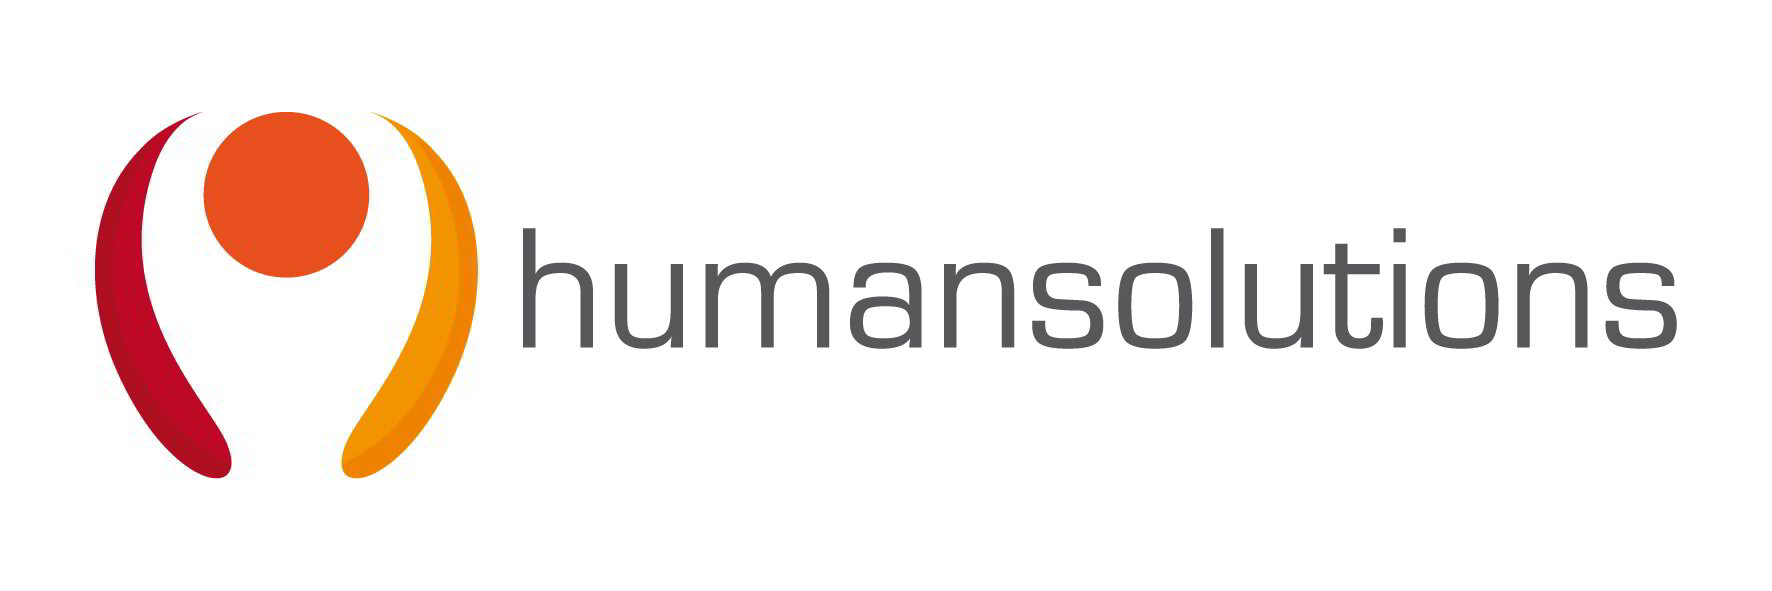 humansolutions | personal and professional development